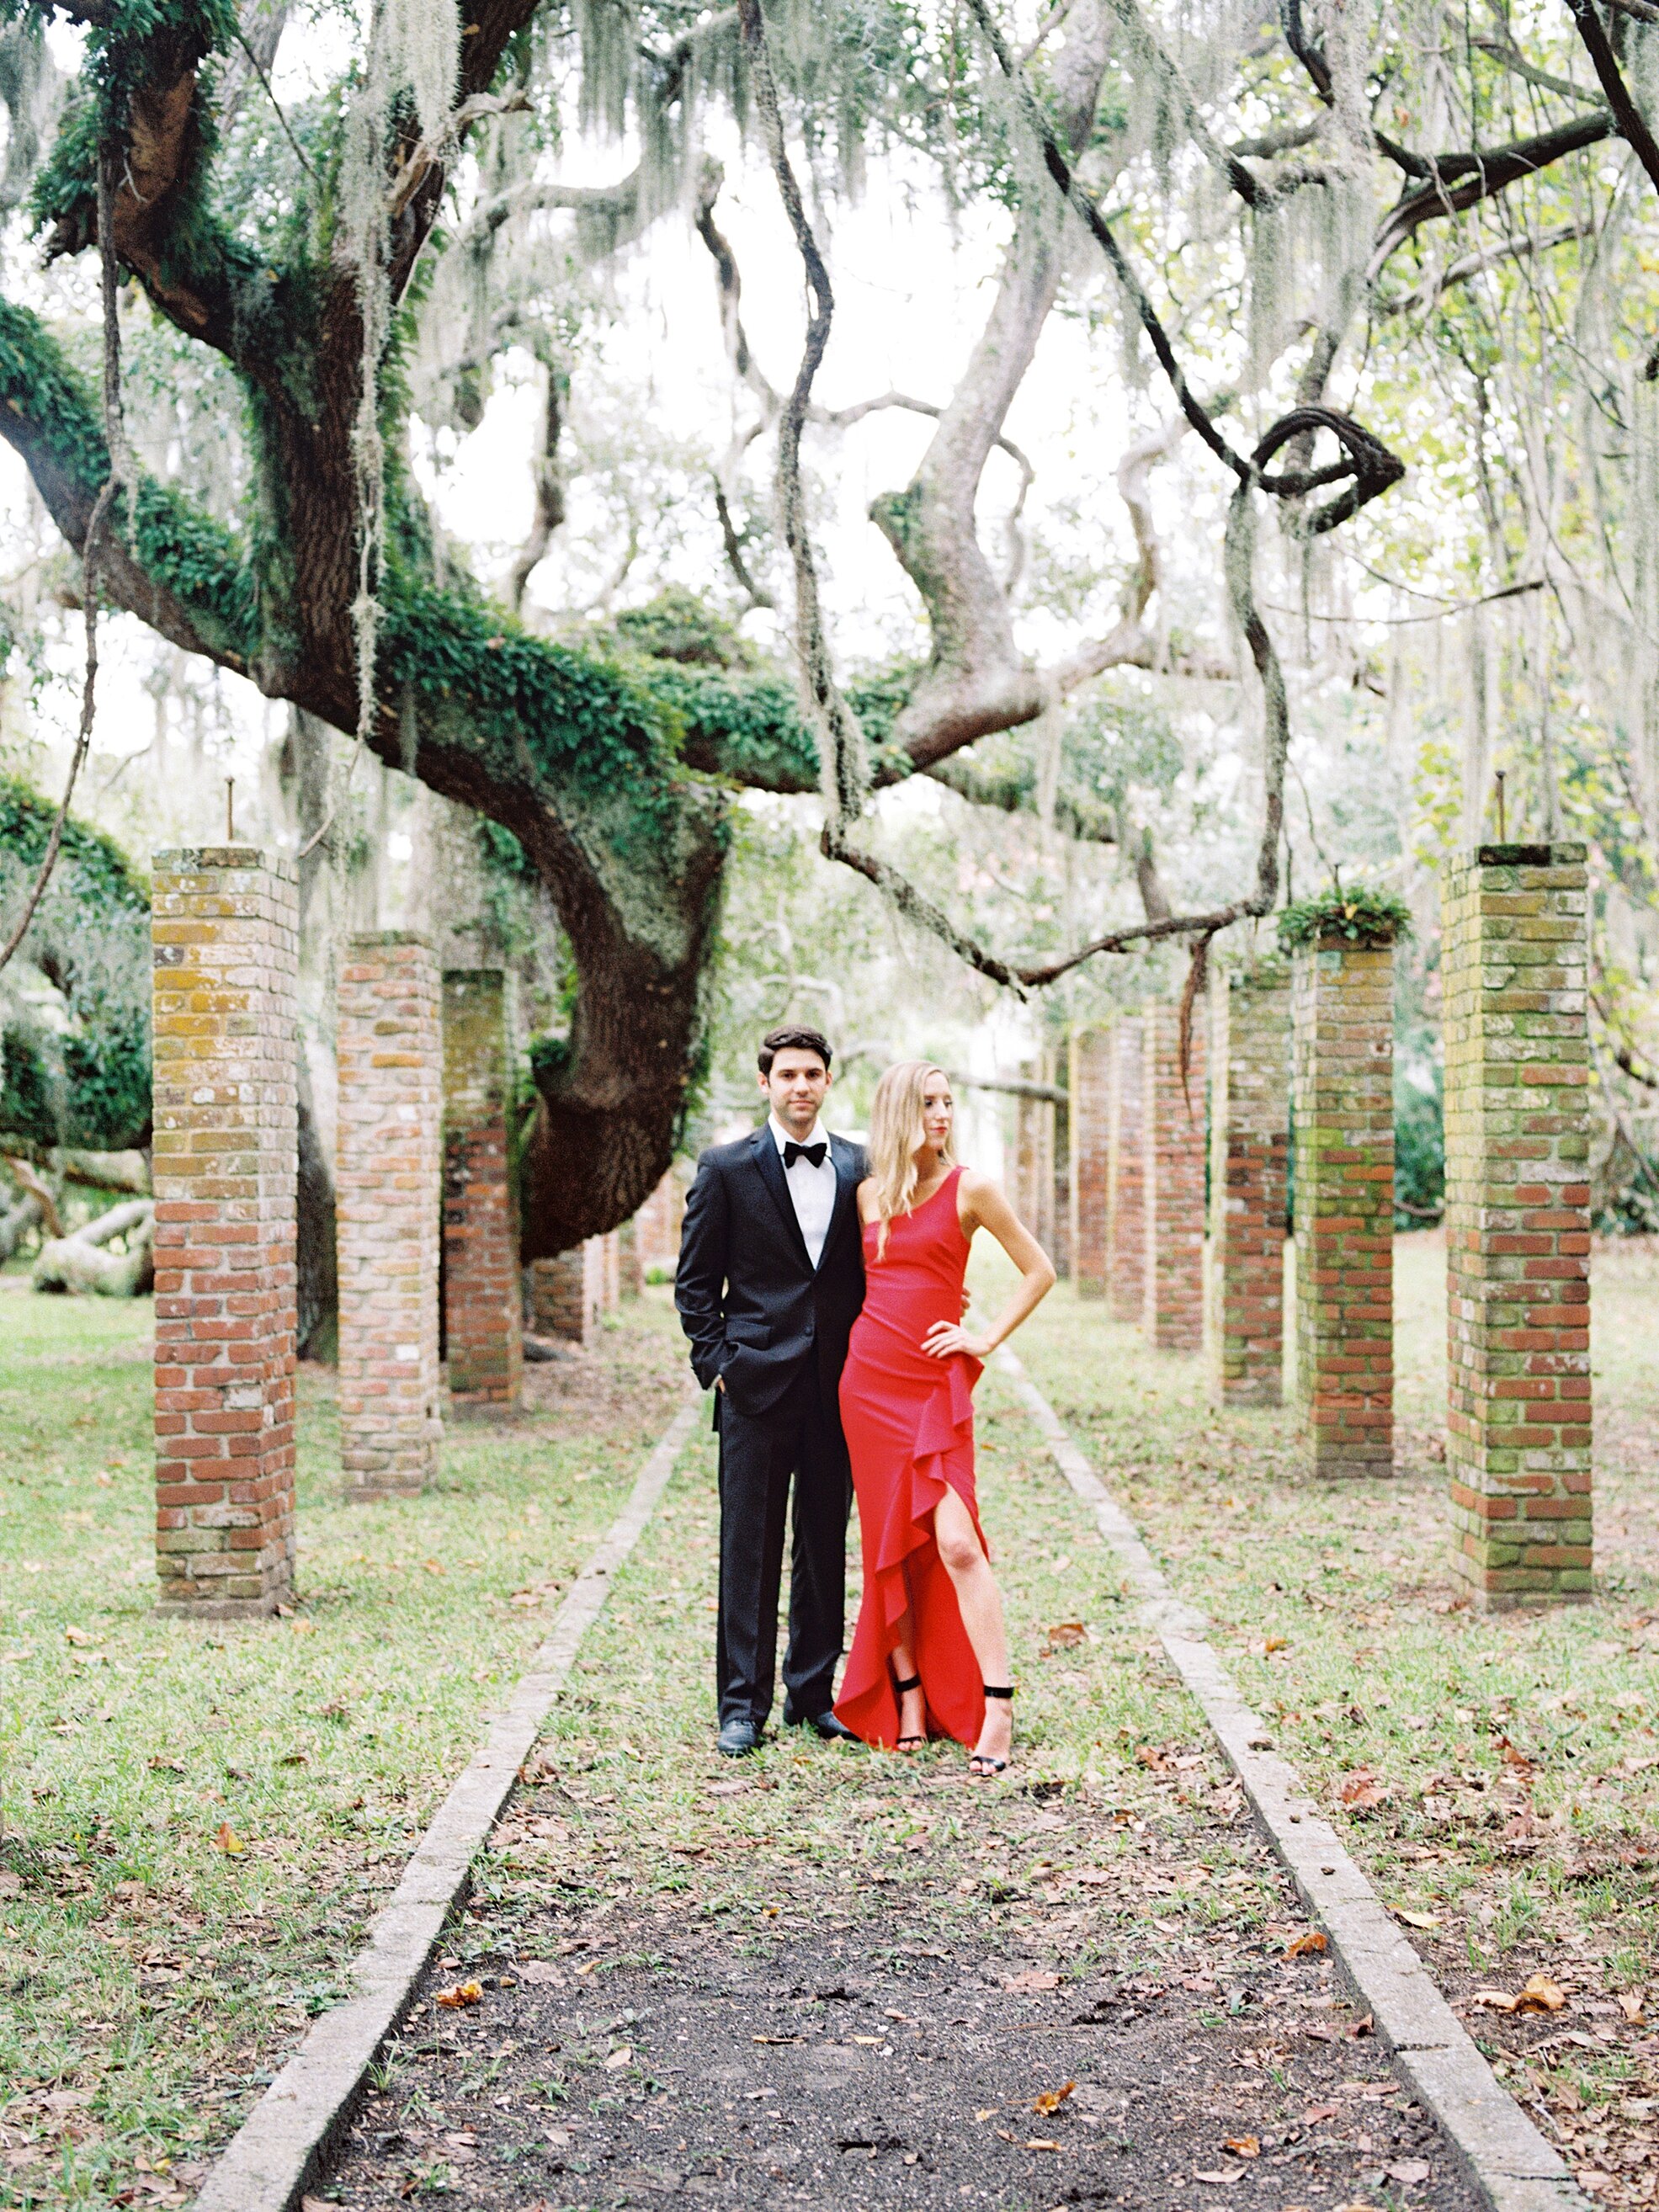 Lisa Silva Photography- Jacksonville and Ponte Vedra Beach Fine Art Film Wedding Photography- Engagement Session at the Greyfield Inn and Cumberland Island, Georgia_0057.jpg